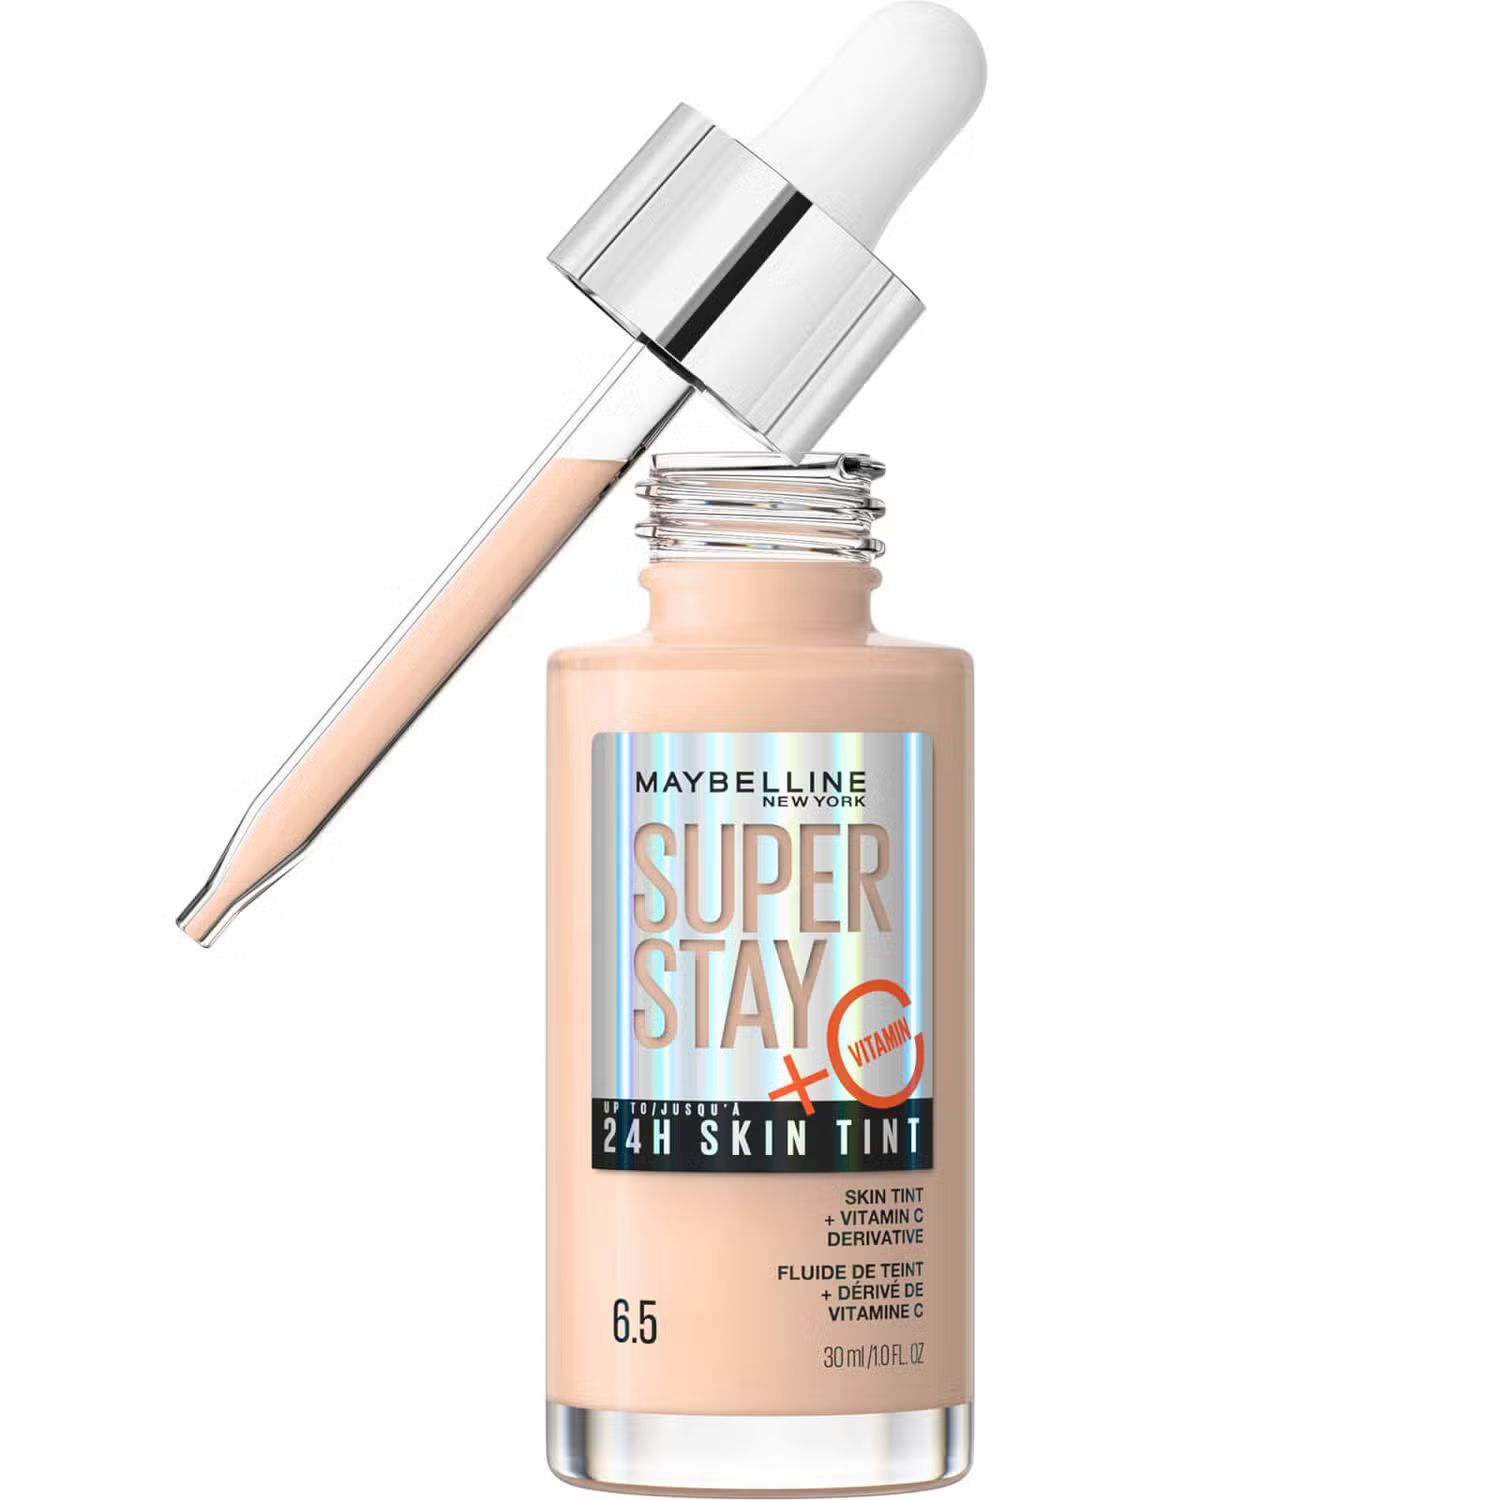 Maybelline Super Stay up to 24H Skin Tint Foundation + Vitamin C 30ml (Various Shades) | Look Fantastic (UK)